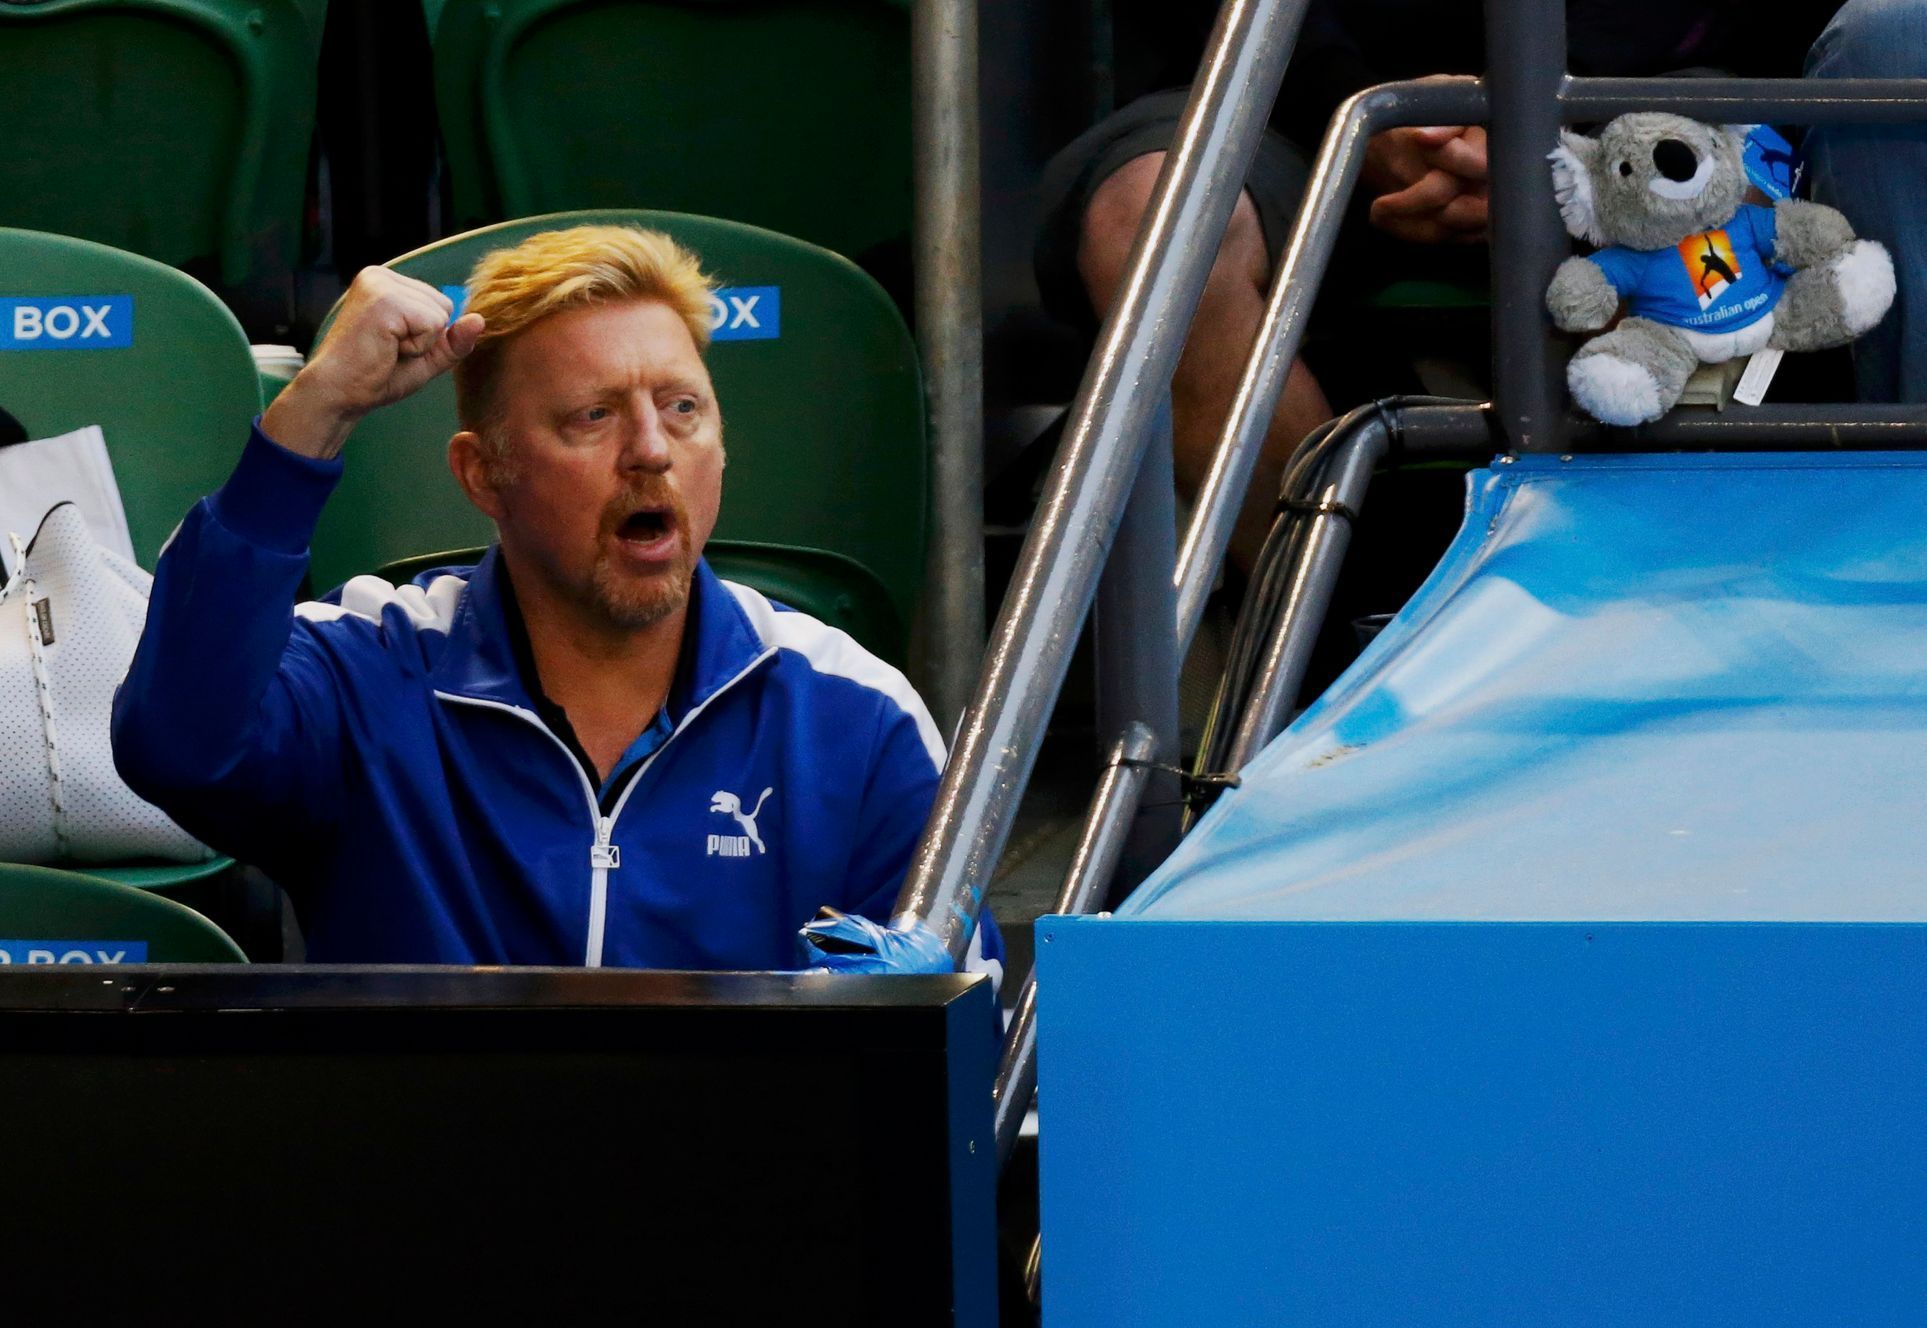 Becker, coach of Djokovic of Serbia, reacts after Djokovic won a point against Murray of Britain during their men's singles final match at the Australian Open 2015 tennis tournament in Melbourne